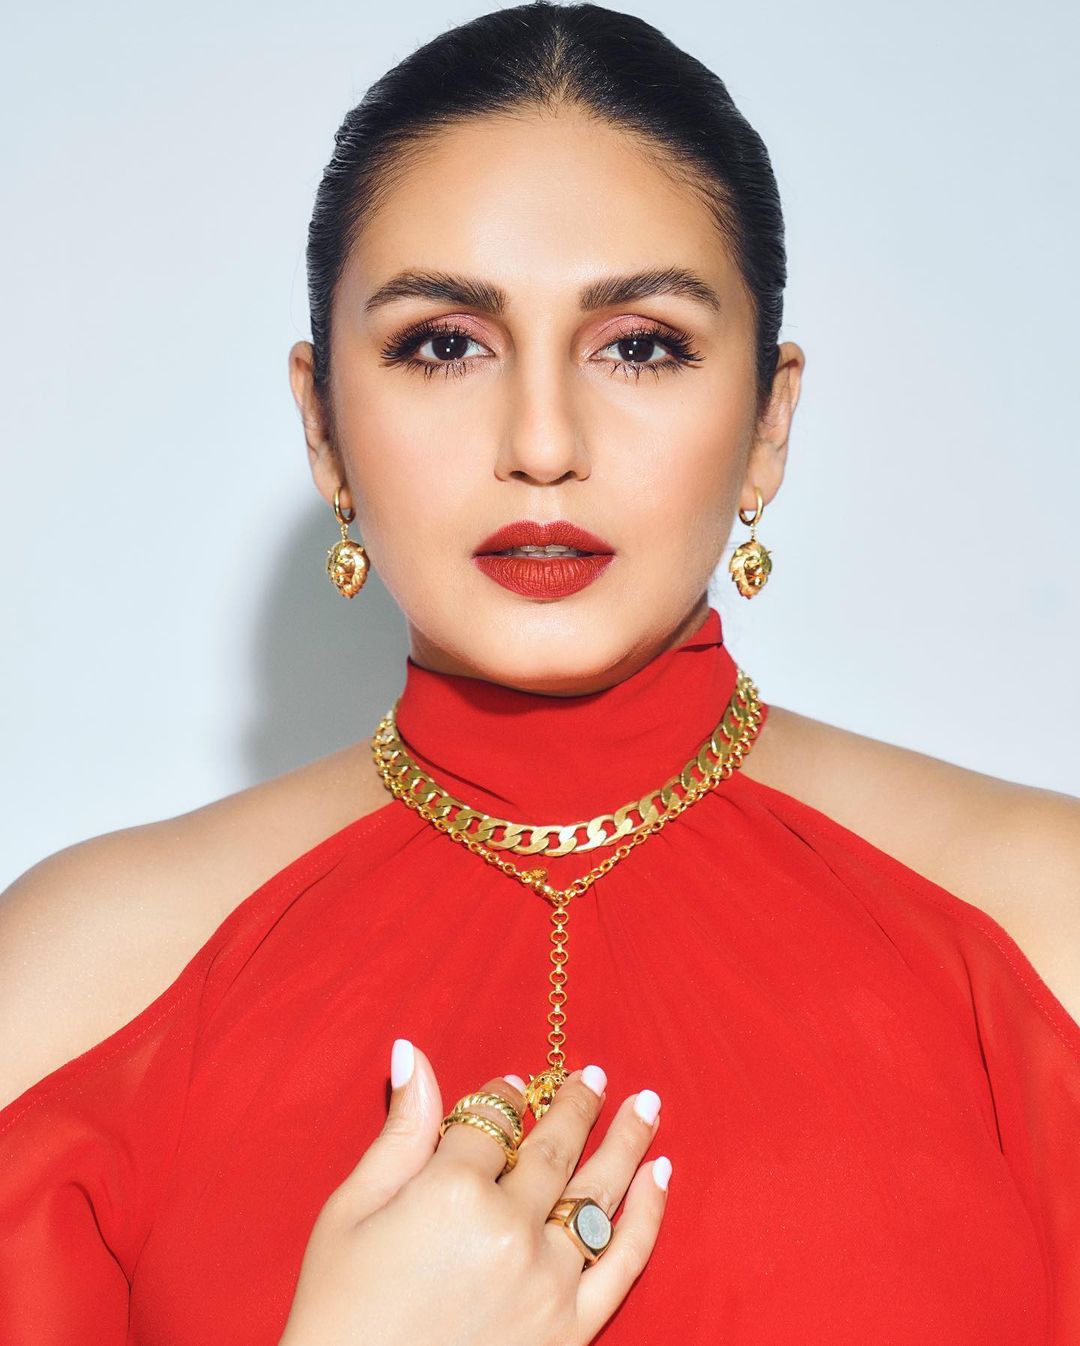 Huma Qureshi aces the cold shoulder style like a boss babe